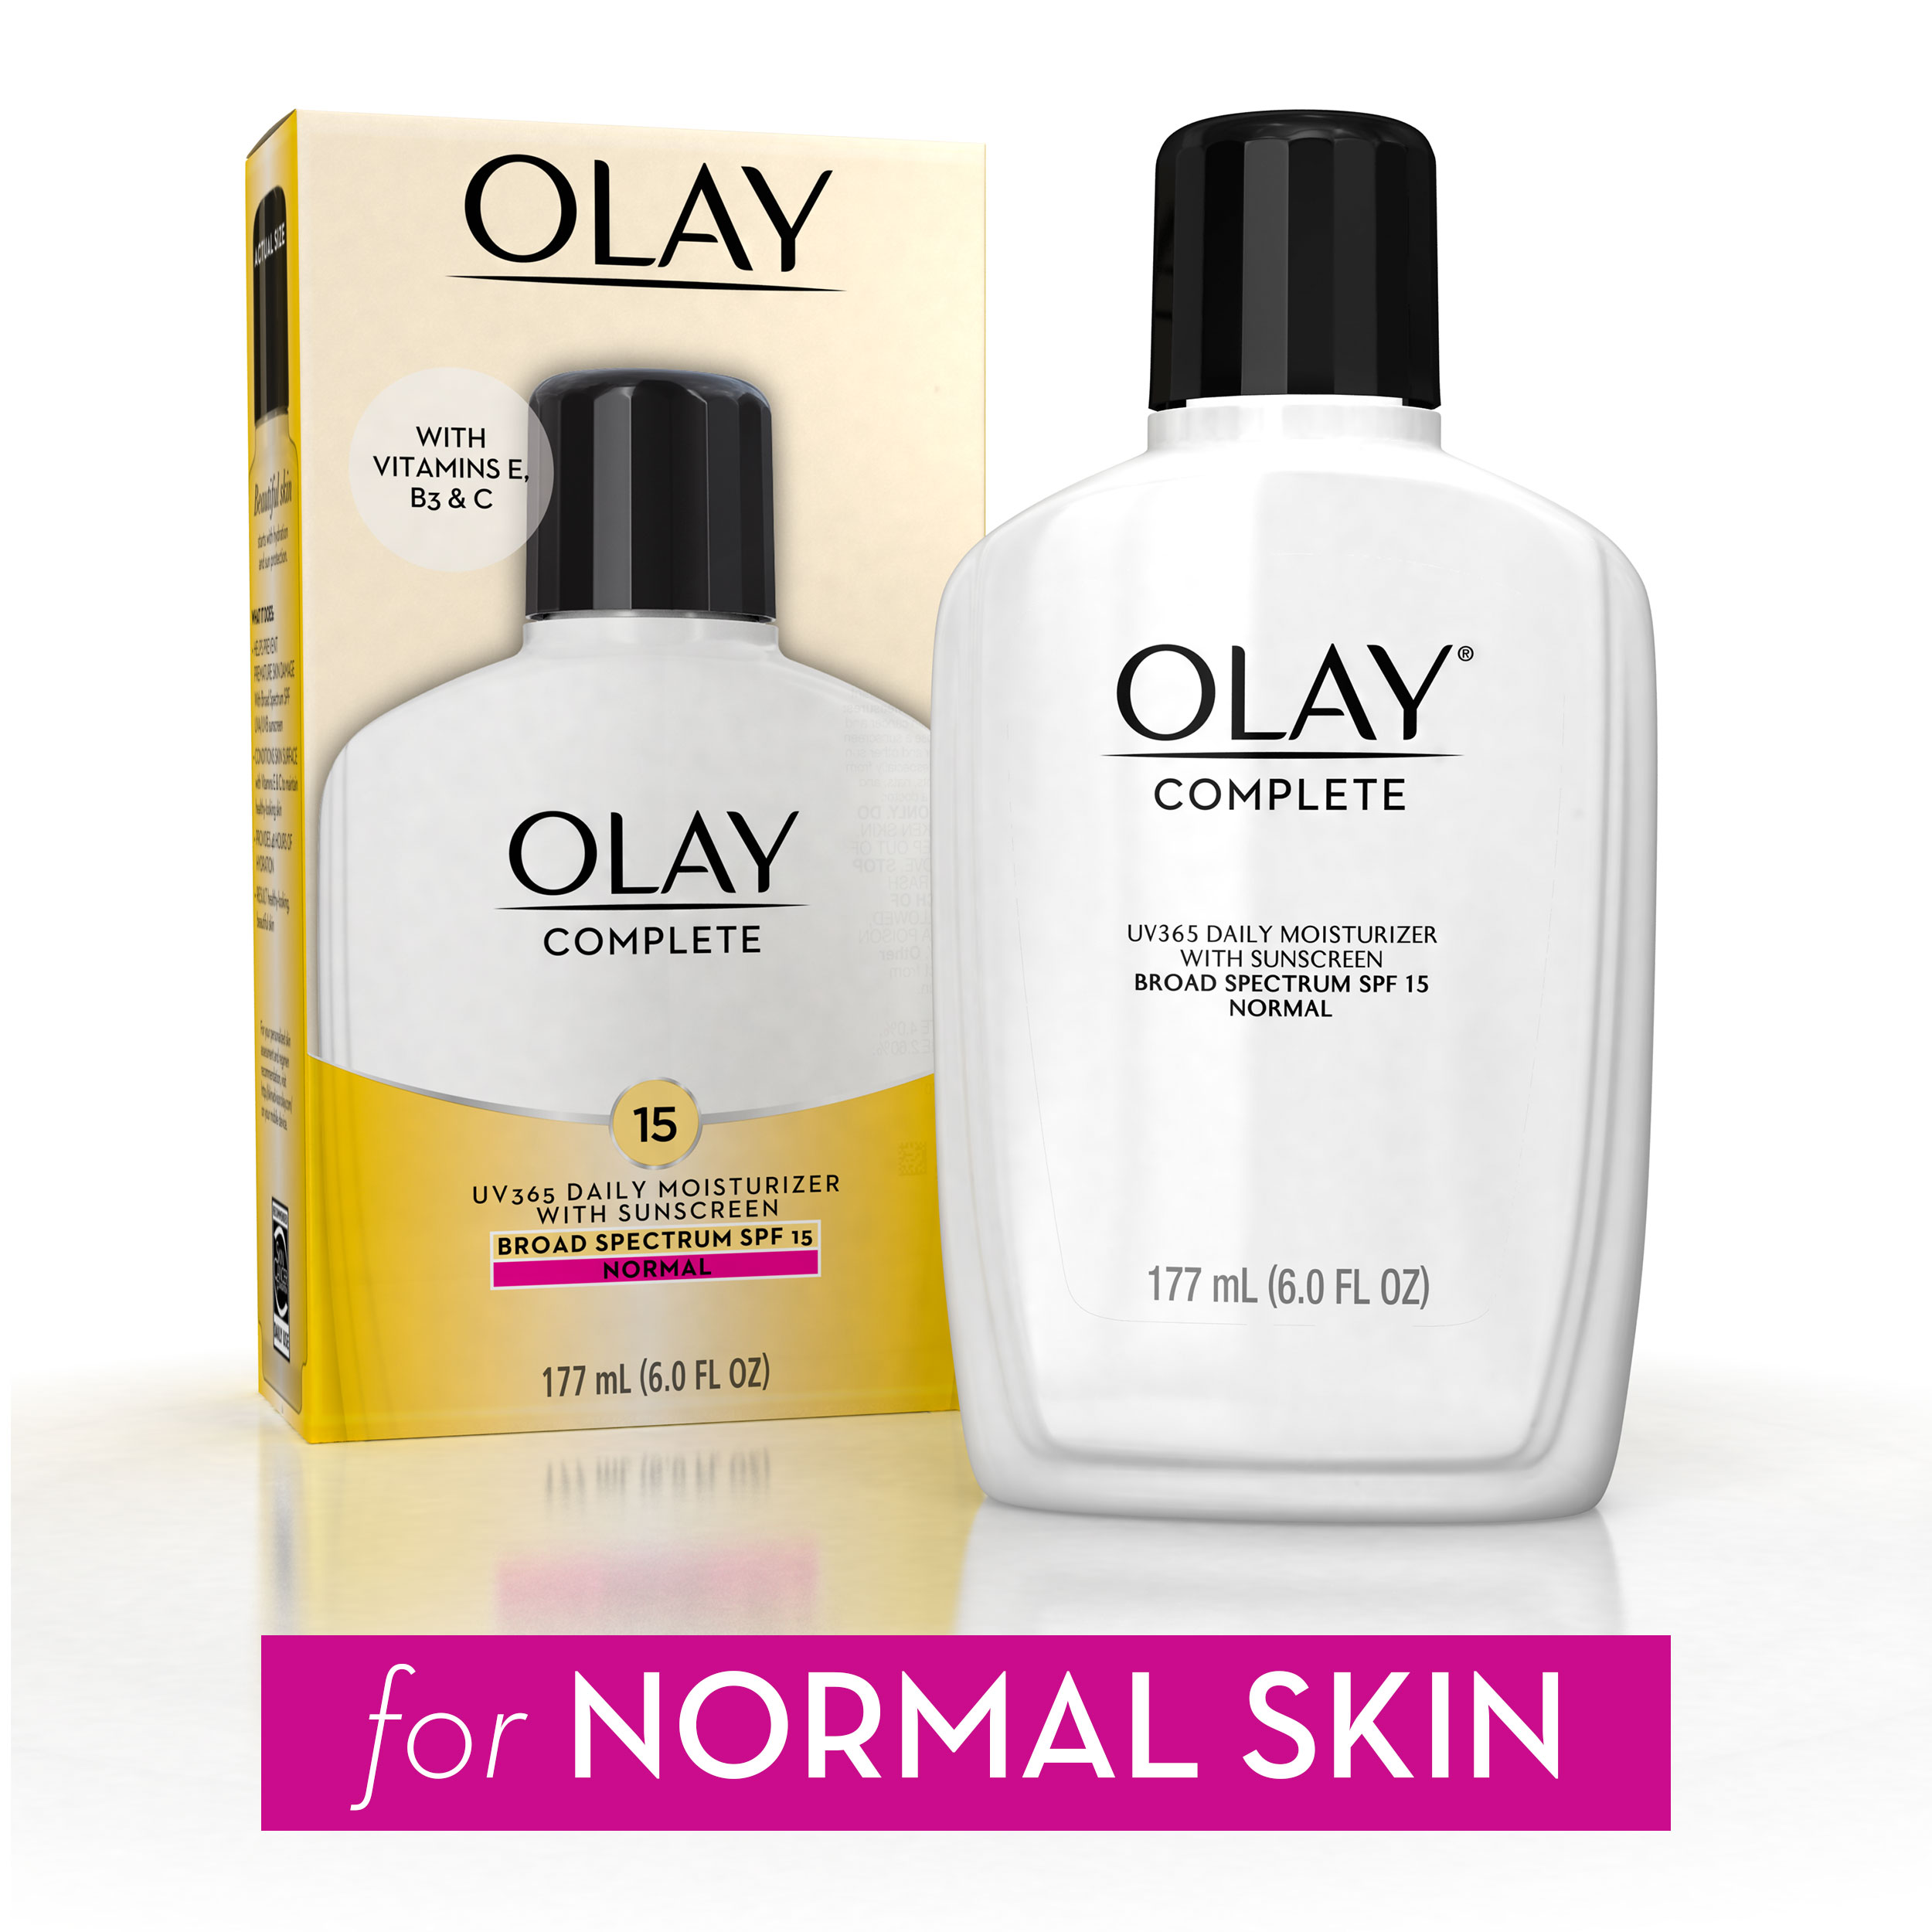 Olay Skincare Complete Lotion Facial Moisturizer with SPF 15 Sun Protection, 6.0 fl oz - image 1 of 8